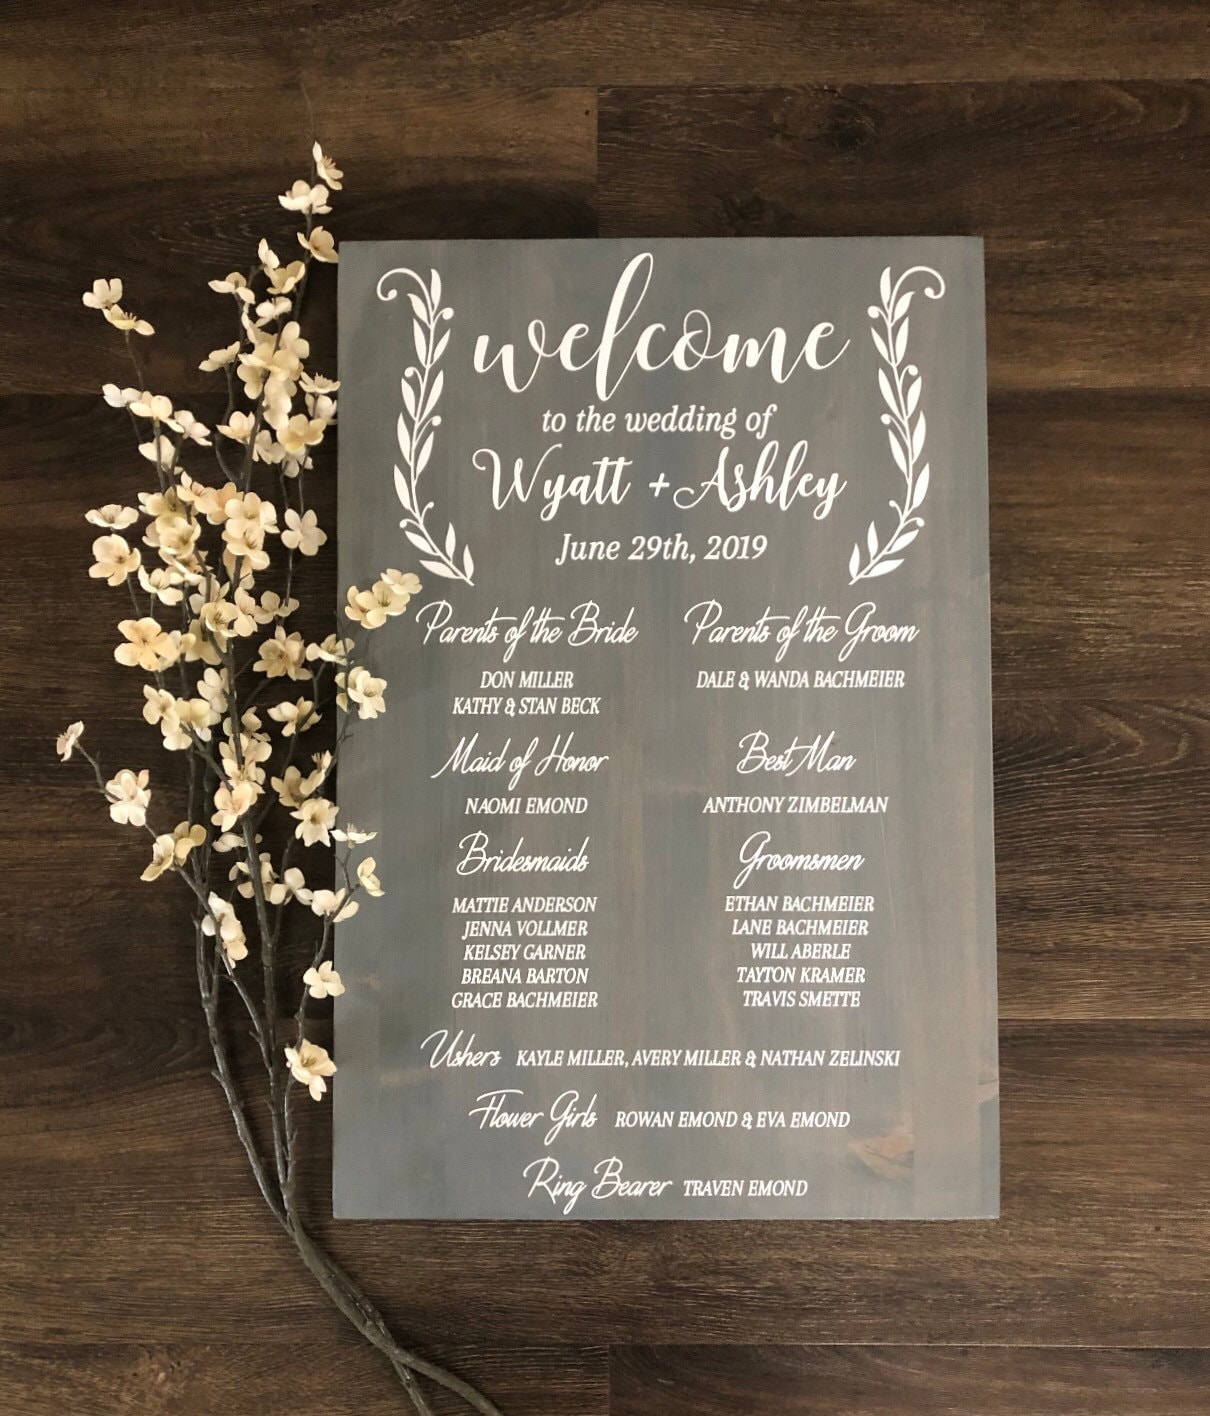 bridal-party-sign-wedding-program-sign-wedding-welcome-sign